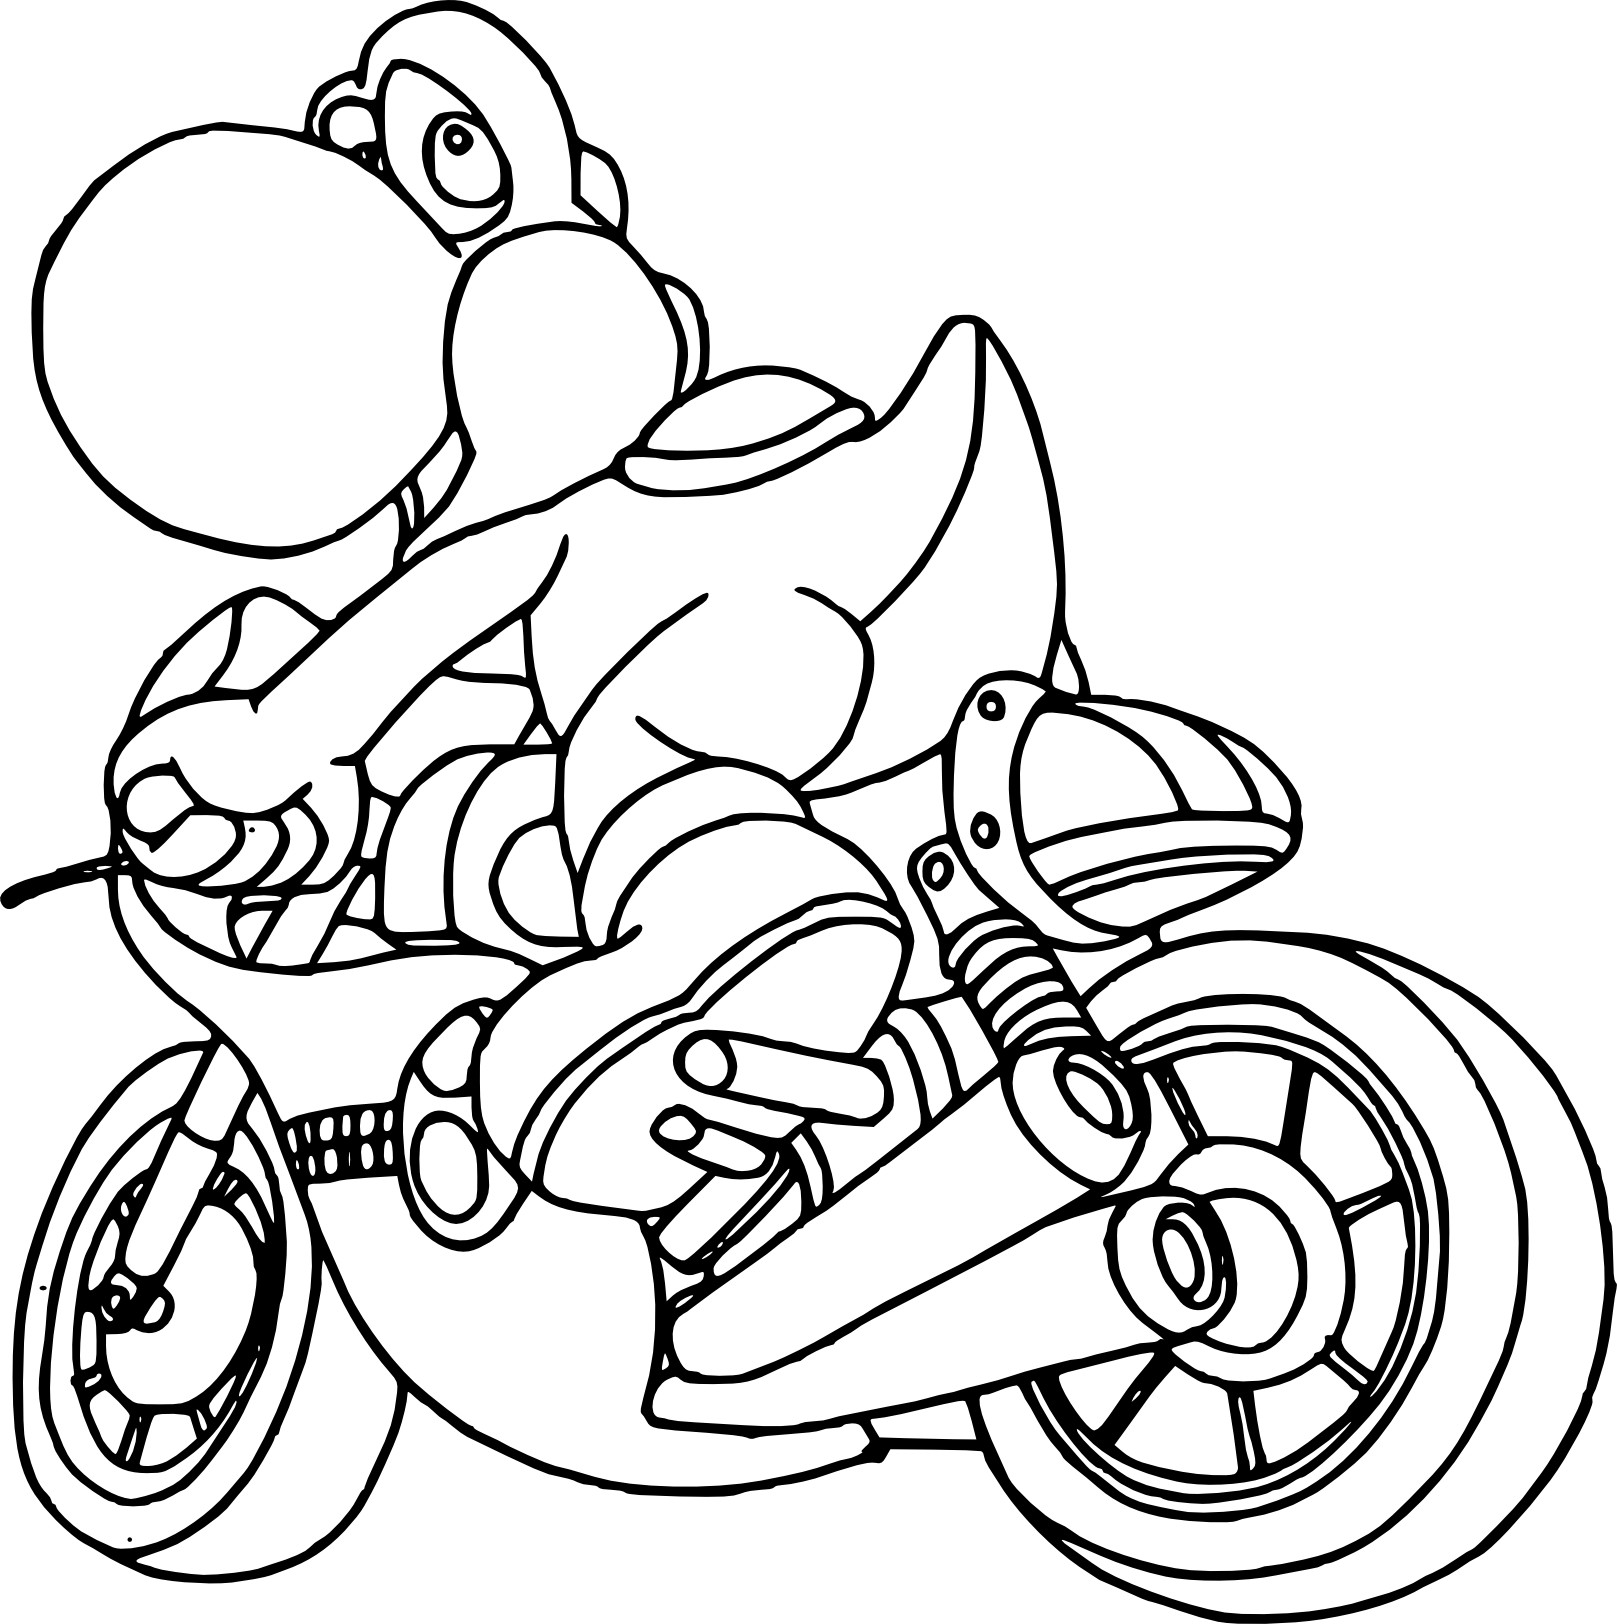 Yoshi On A Motorcycle coloring page